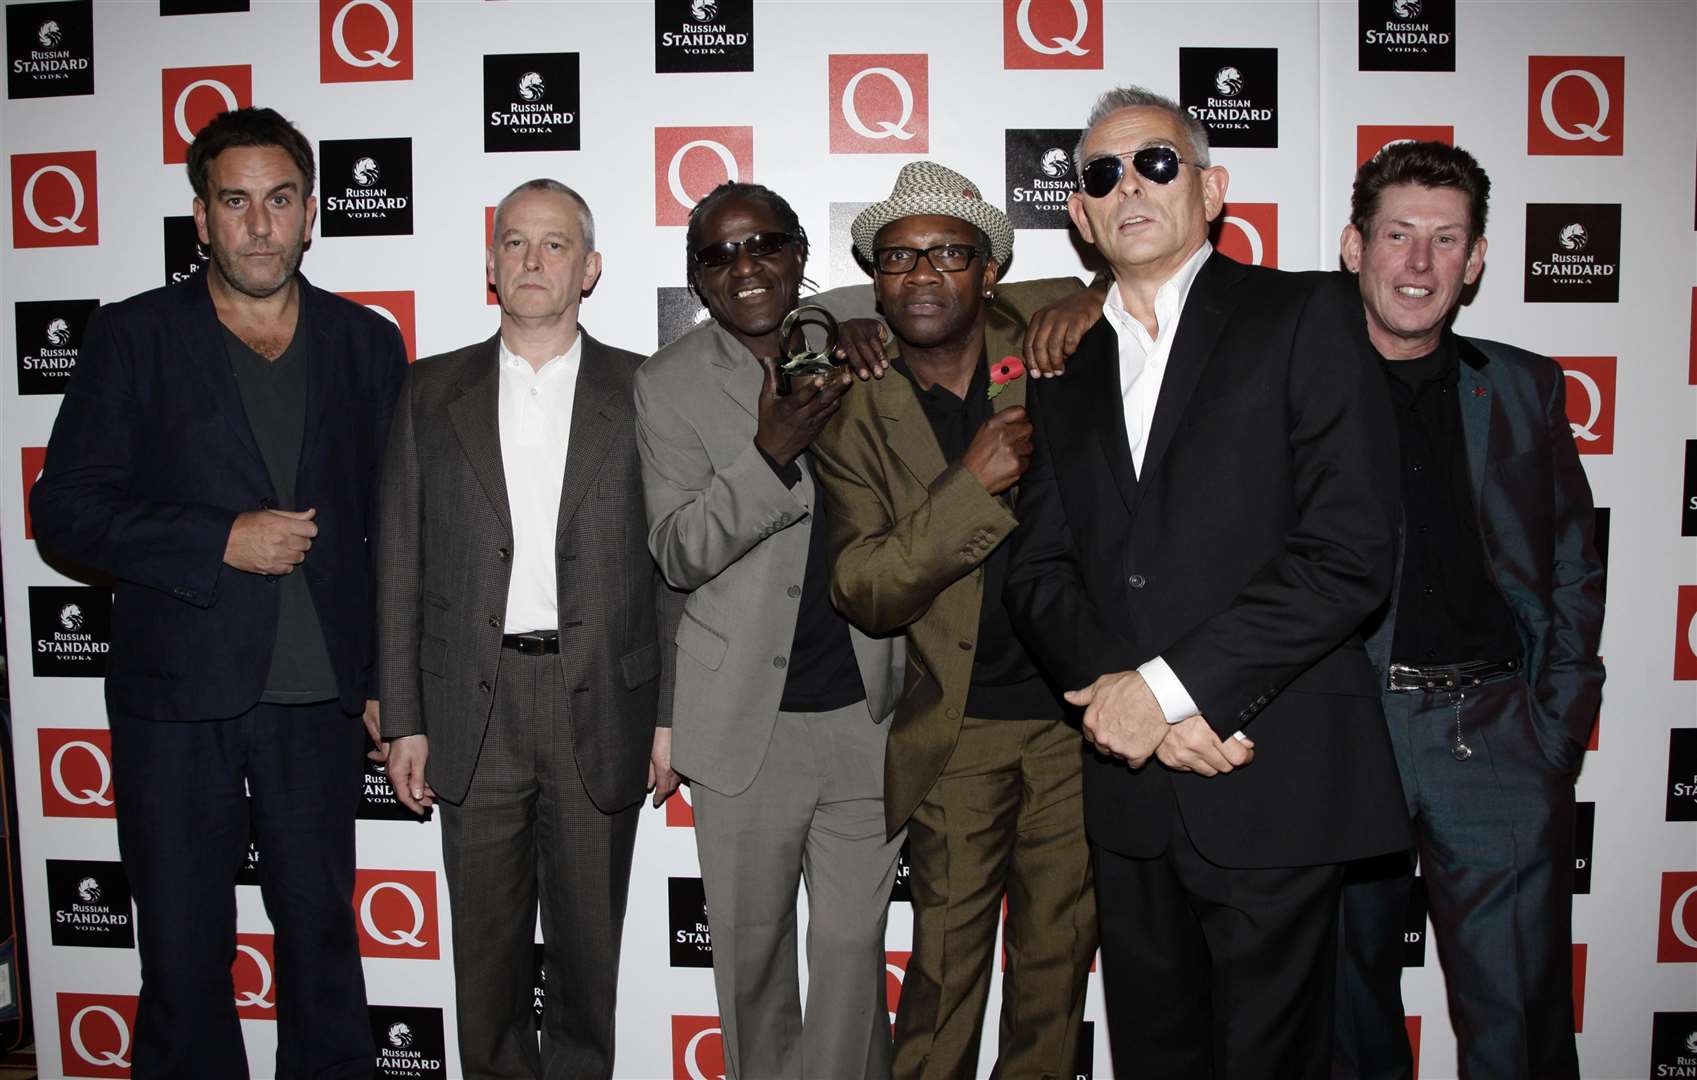 The Specials, (left to right) Terry Hall, Horace Panter, Neville Staple, Lynval Golding, John Bradbury and Roddy Byers (Yui Mok/PA)